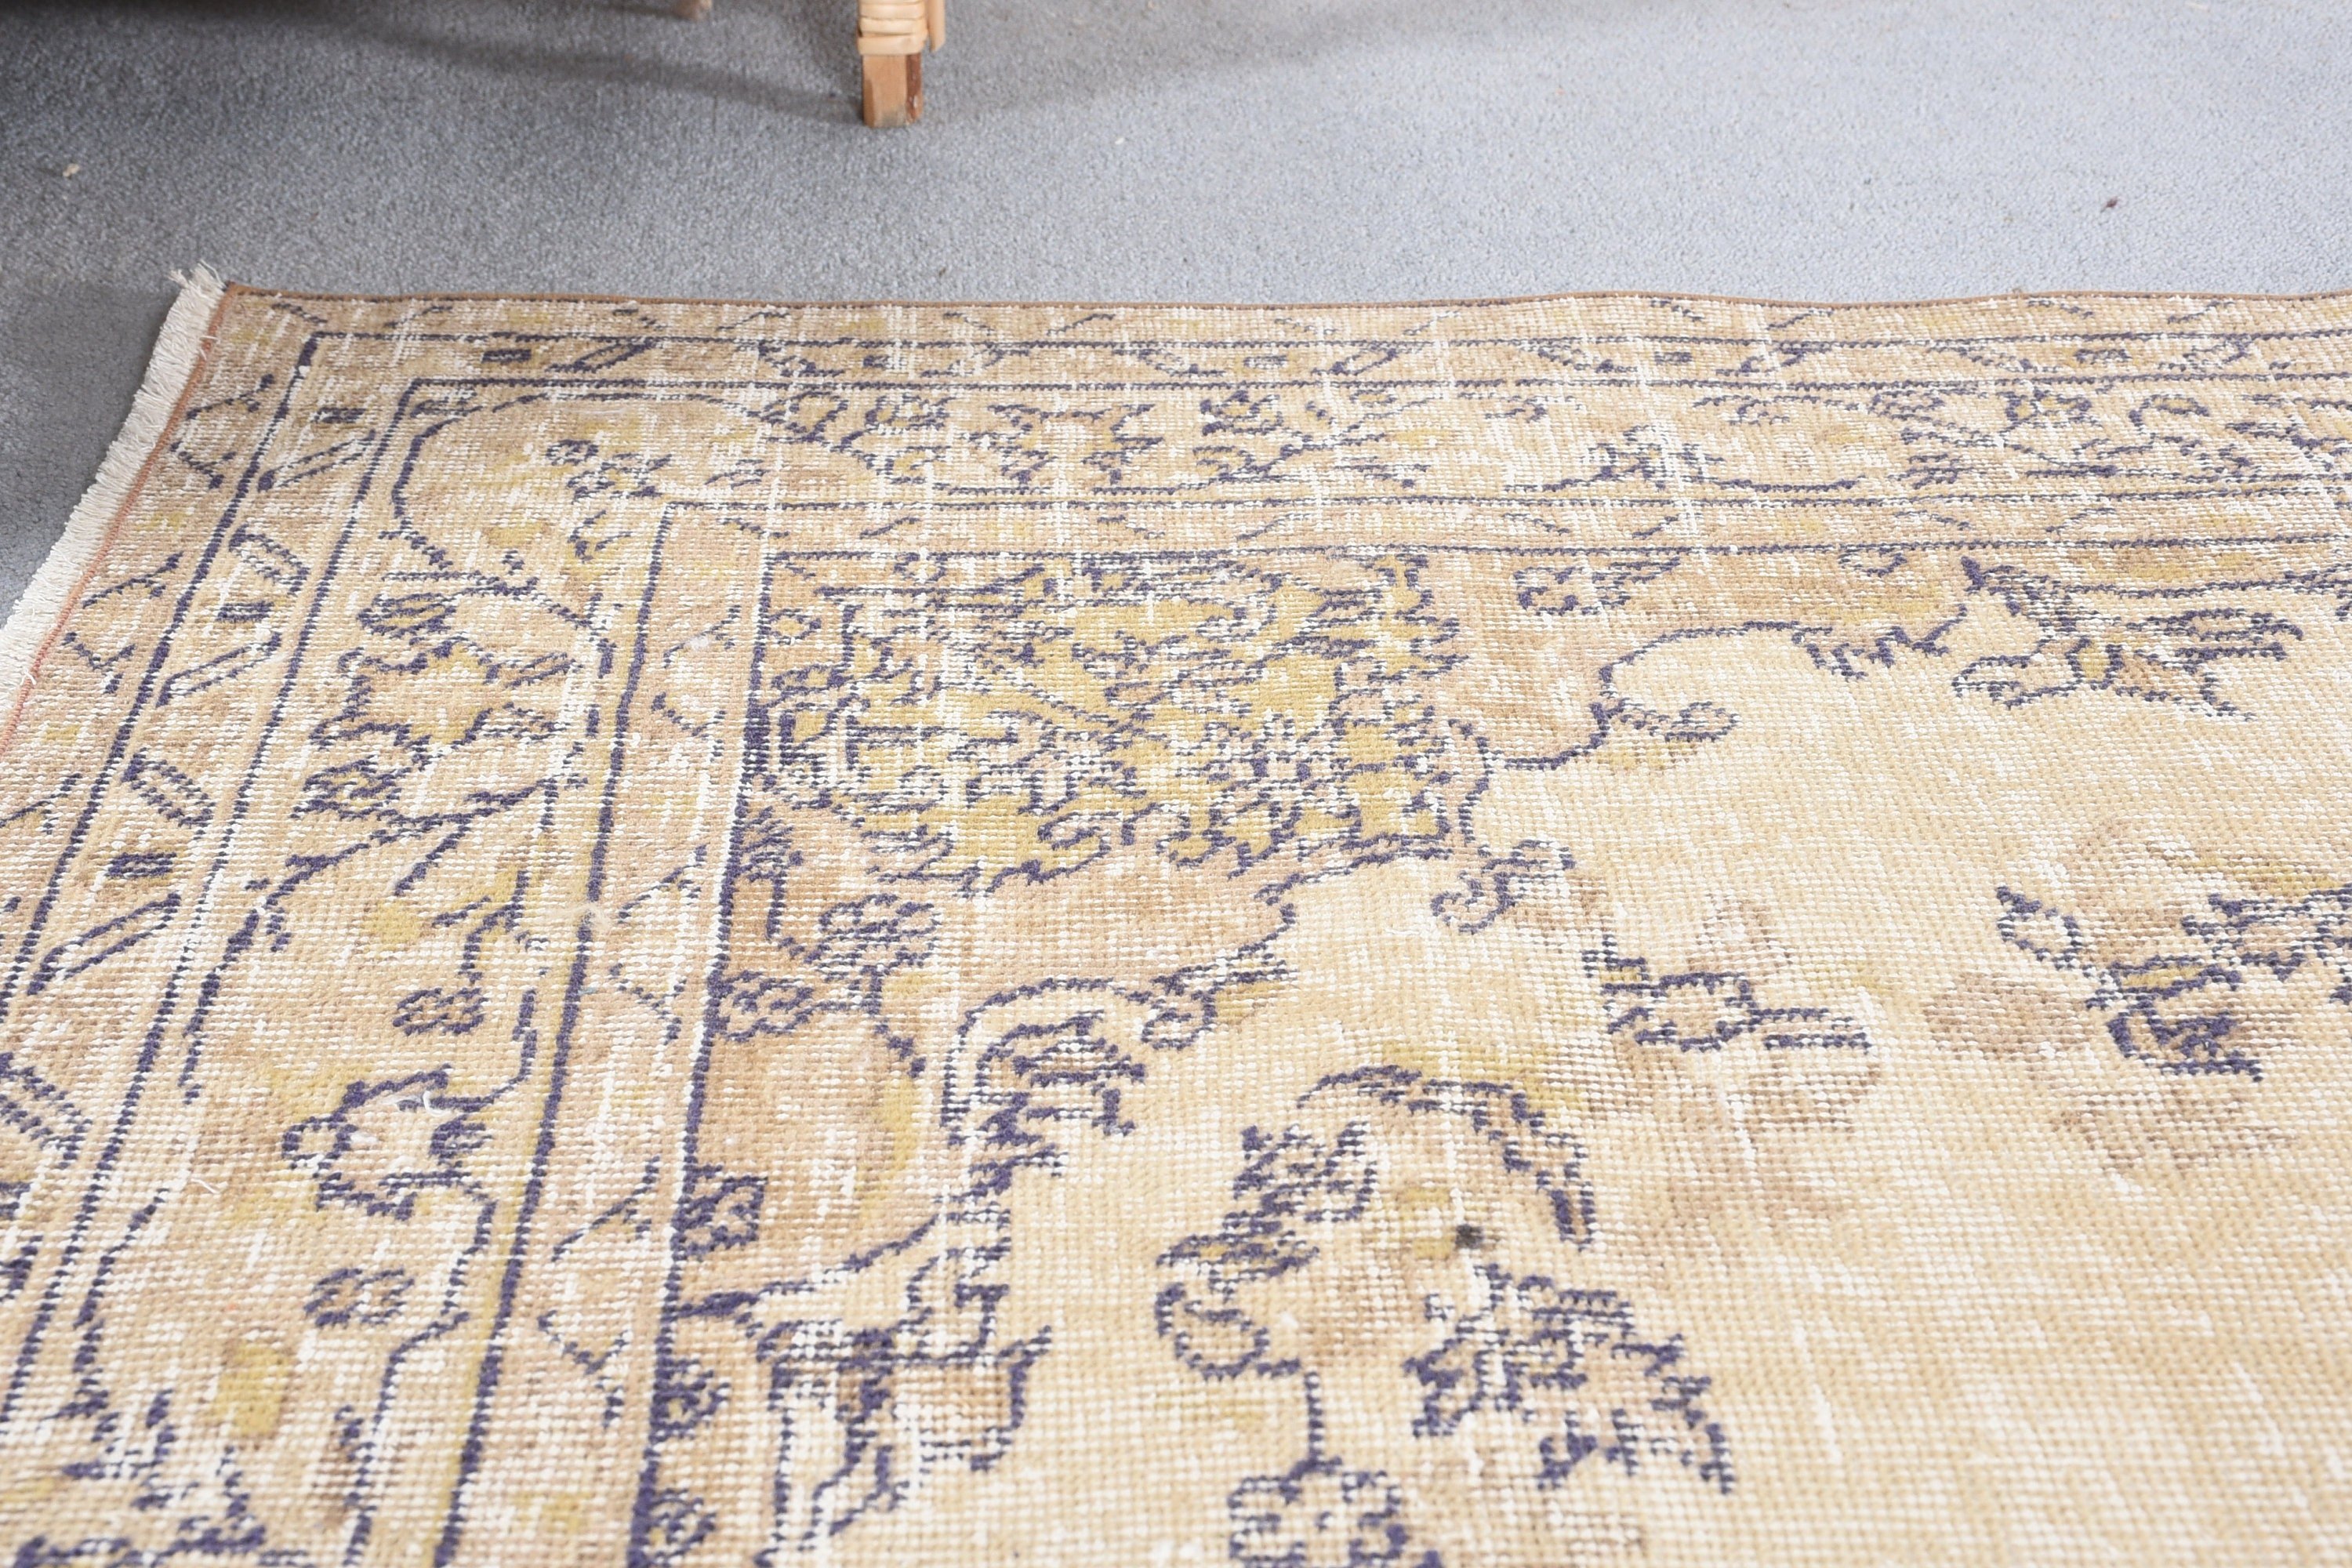 Kitchen Rugs, Rugs for Dining Room, Beige Bedroom Rug, 5.3x9.1 ft Large Rug, Vintage Rugs, Dining Room Rugs, Turkish Rug